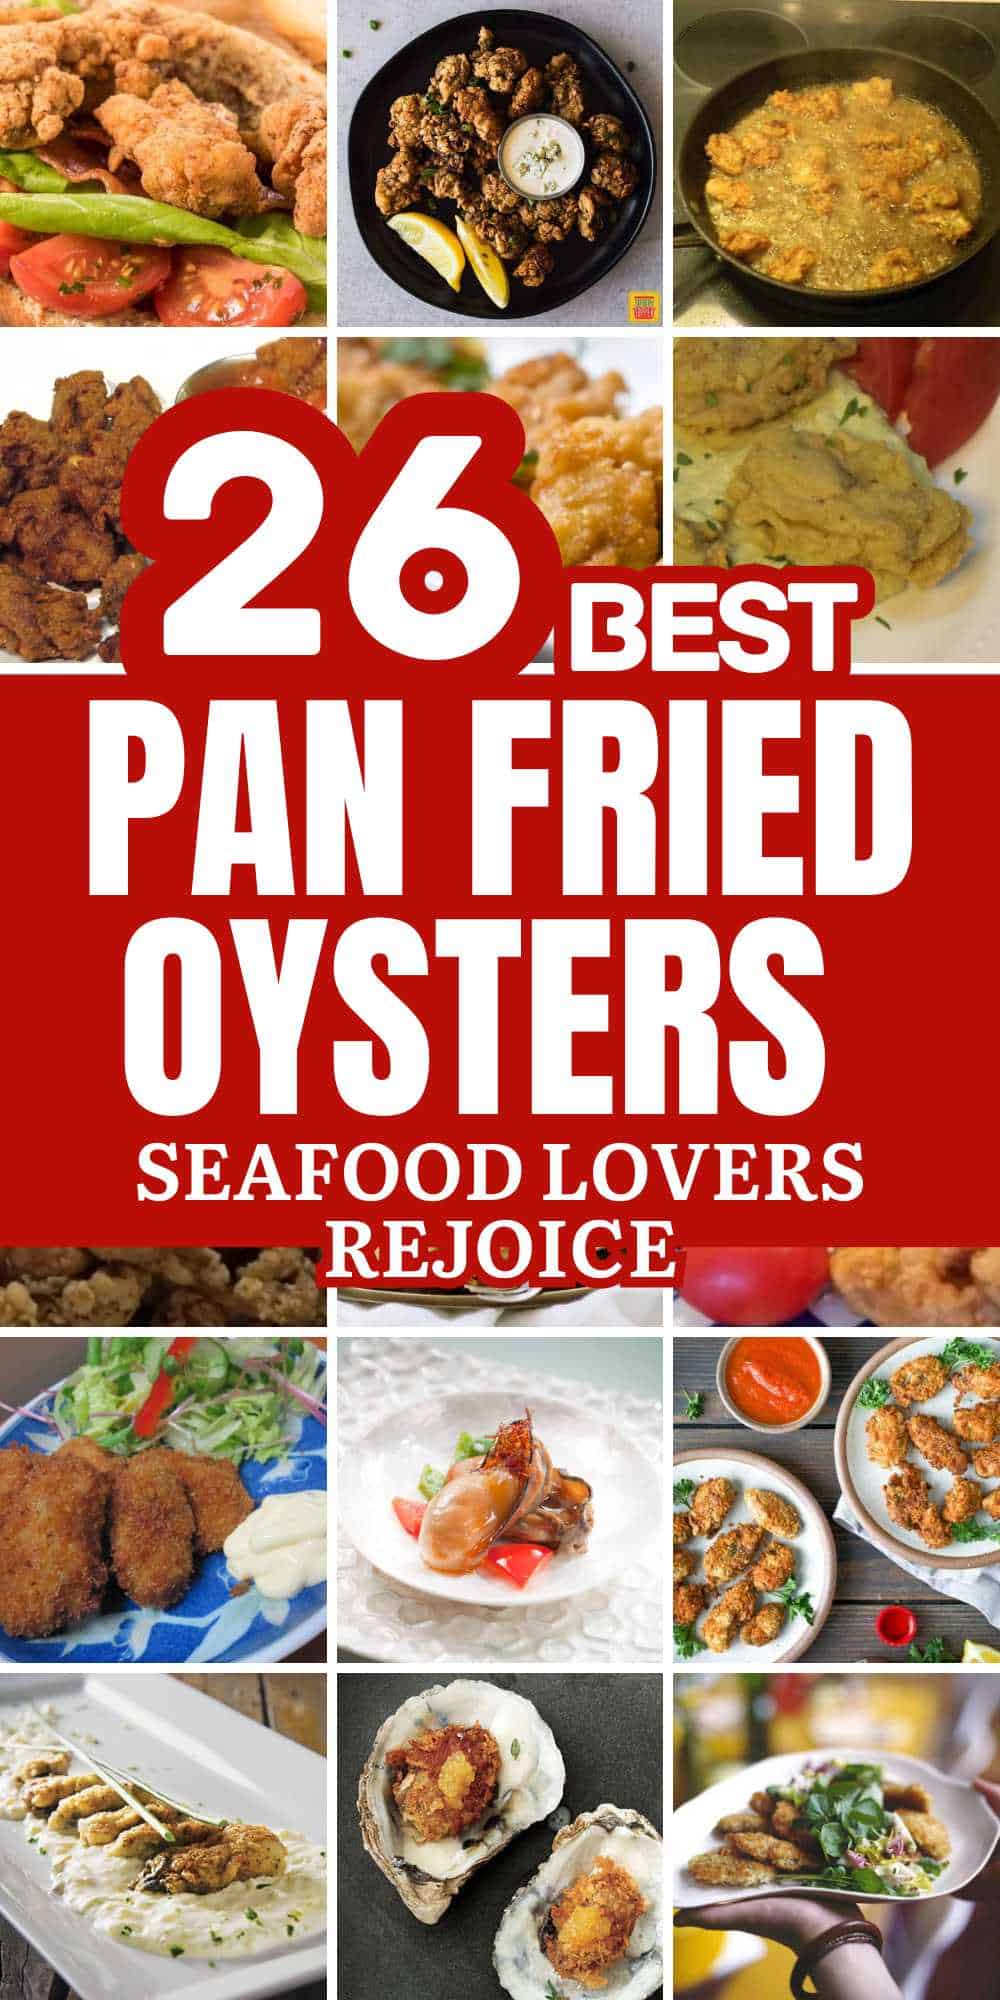 Best Pan-Fried Oysters